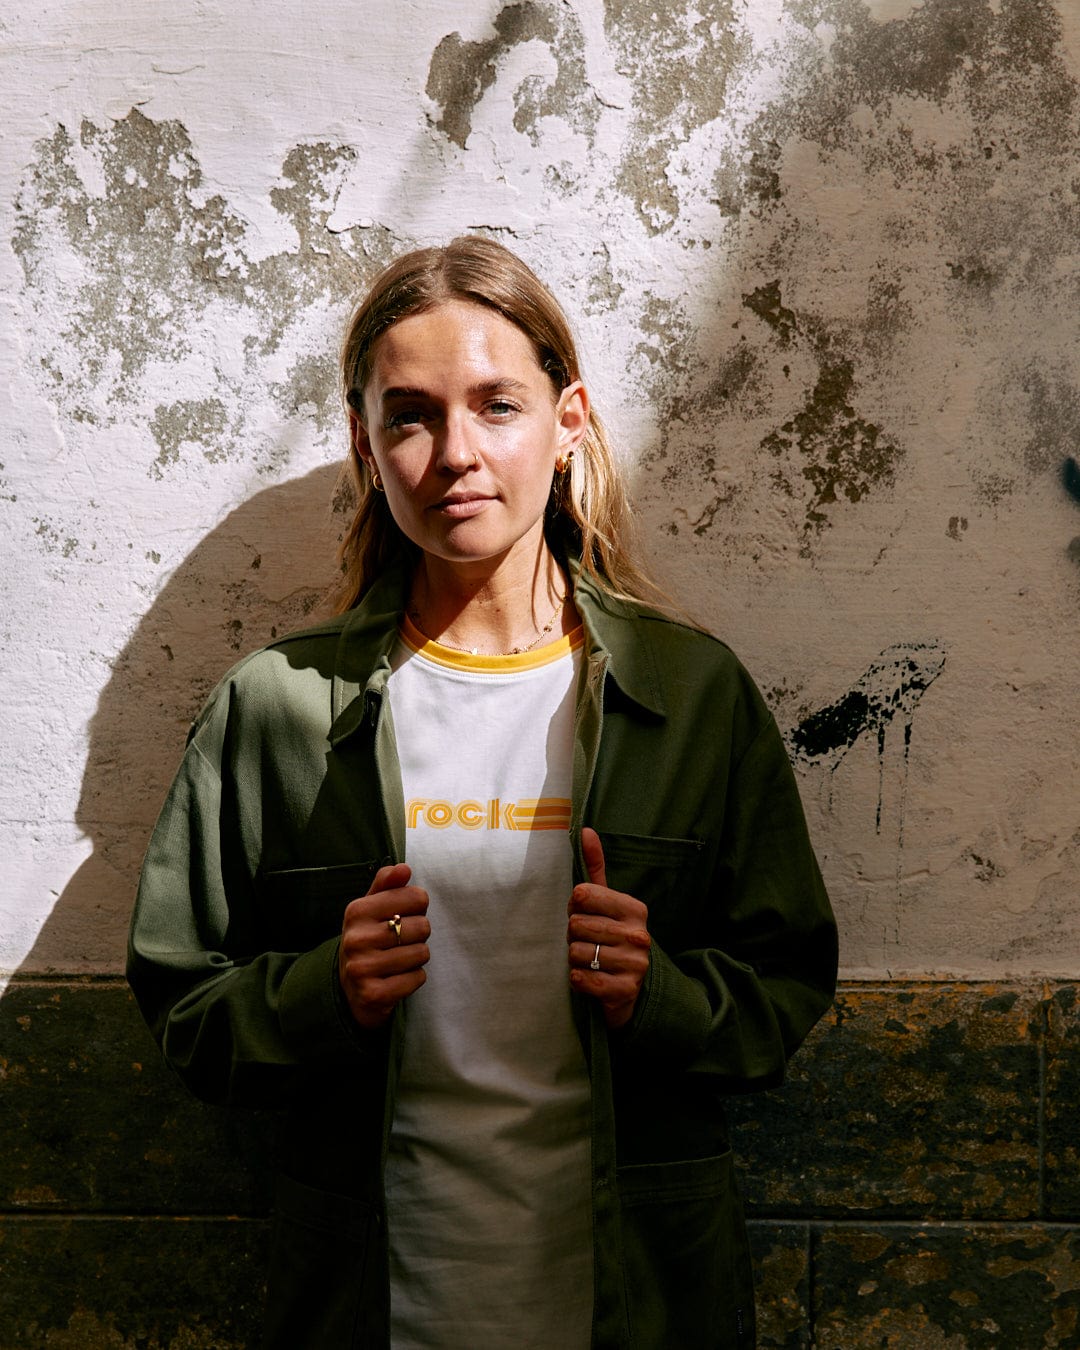 Young woman in a green jacket and Retro Ribbon - Womens Shorts Sleeve T-Shirt - White by Saltrock standing against a textured wall, sunlight casting shadows on her face.